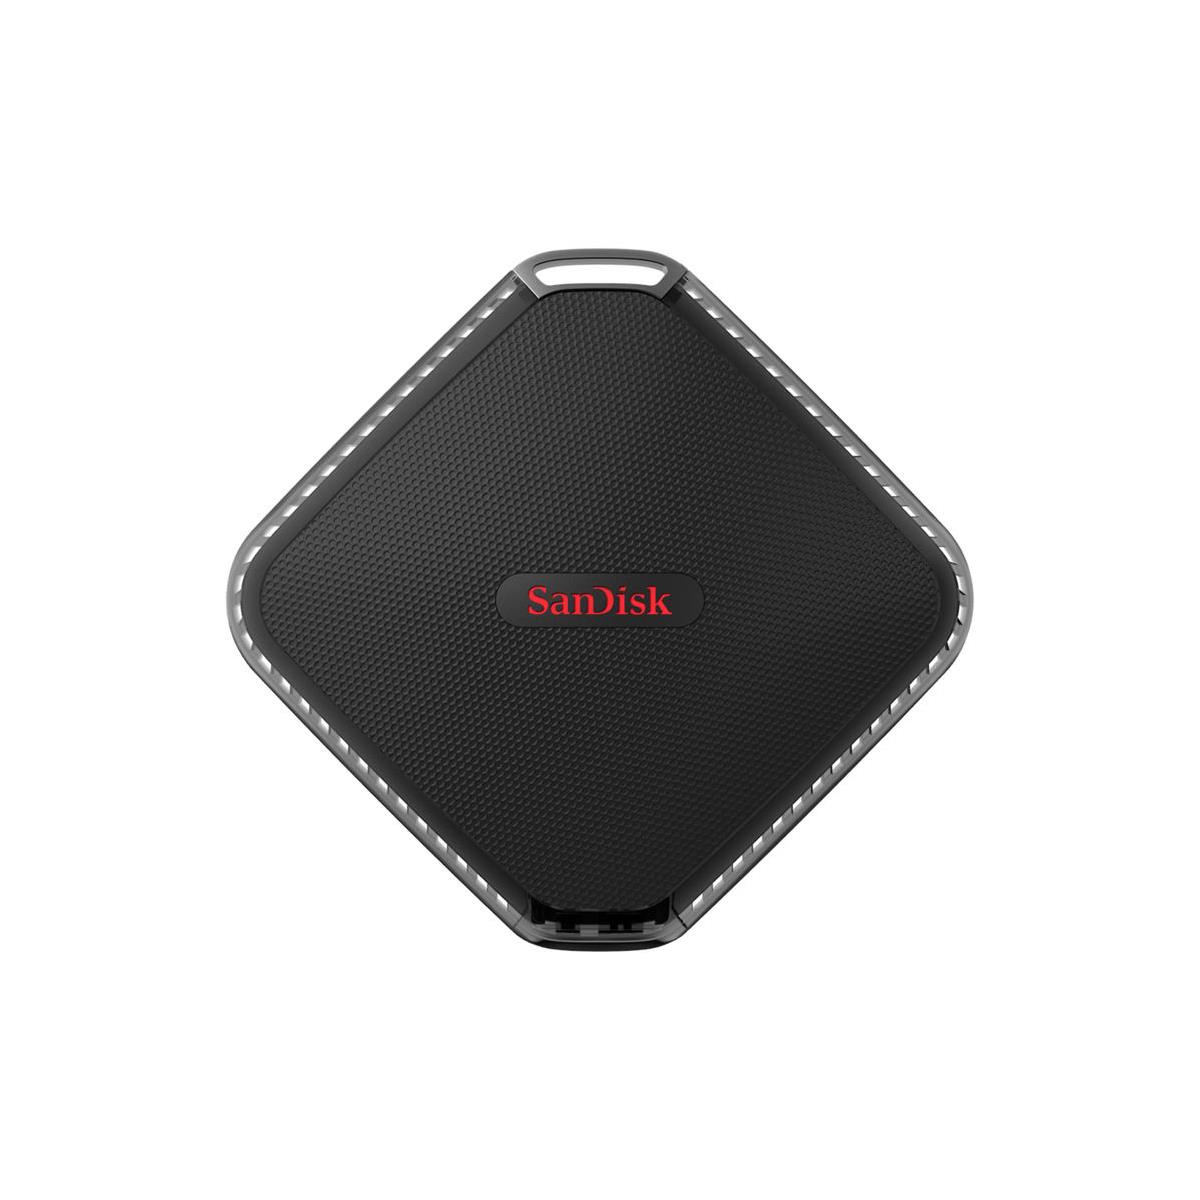 Image of SanDisk 480GB Extreme 500 External Solid State Drive (SSD)